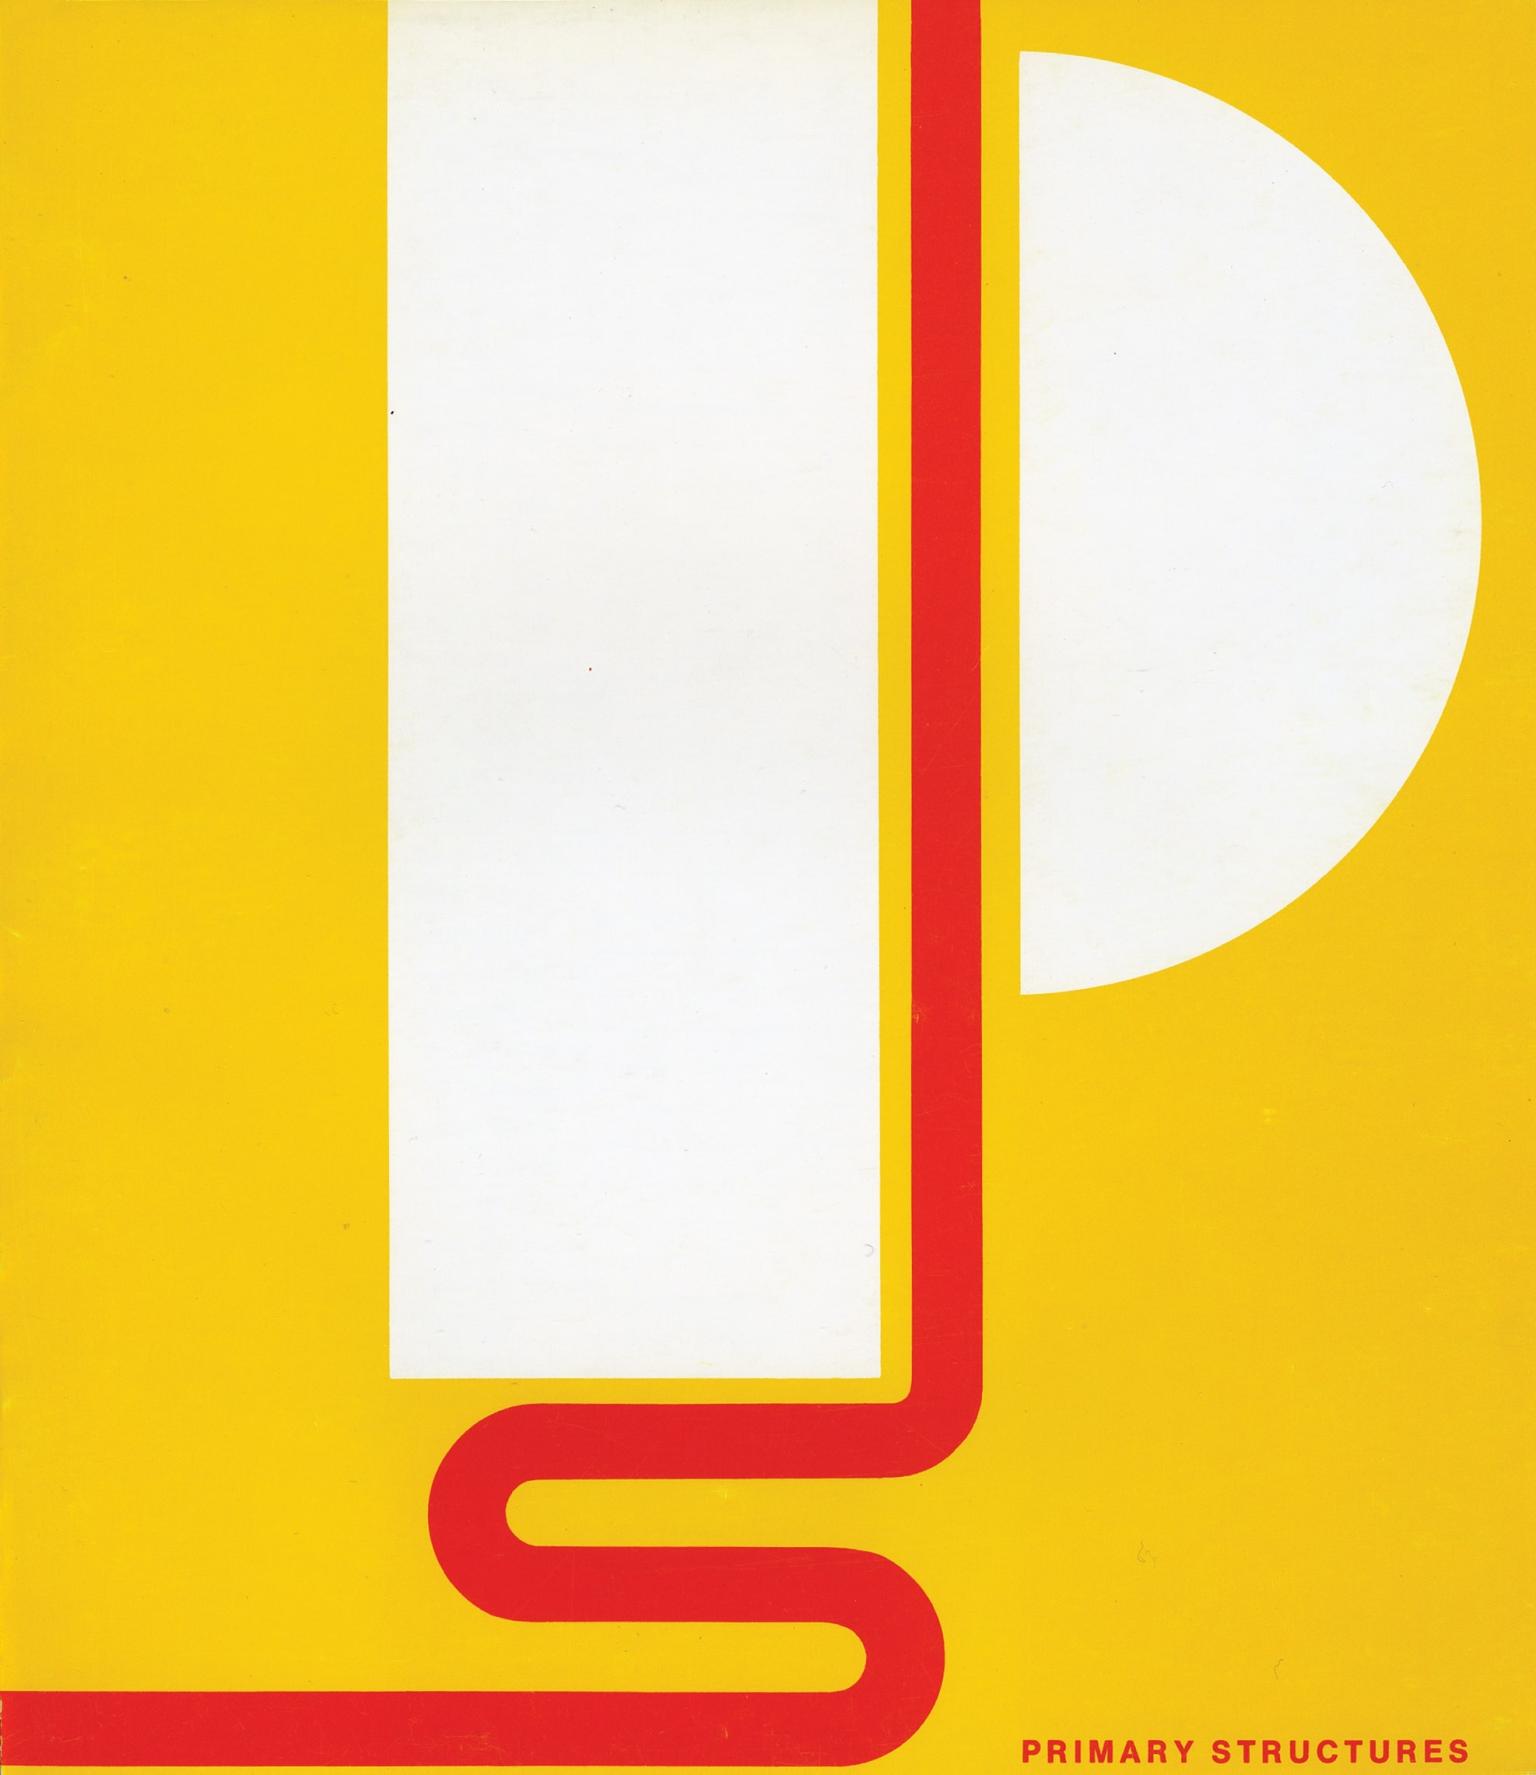 Cover art featuring a stylized P and S in a minimalist style with "Primary Structures" written in small font on the bottom.